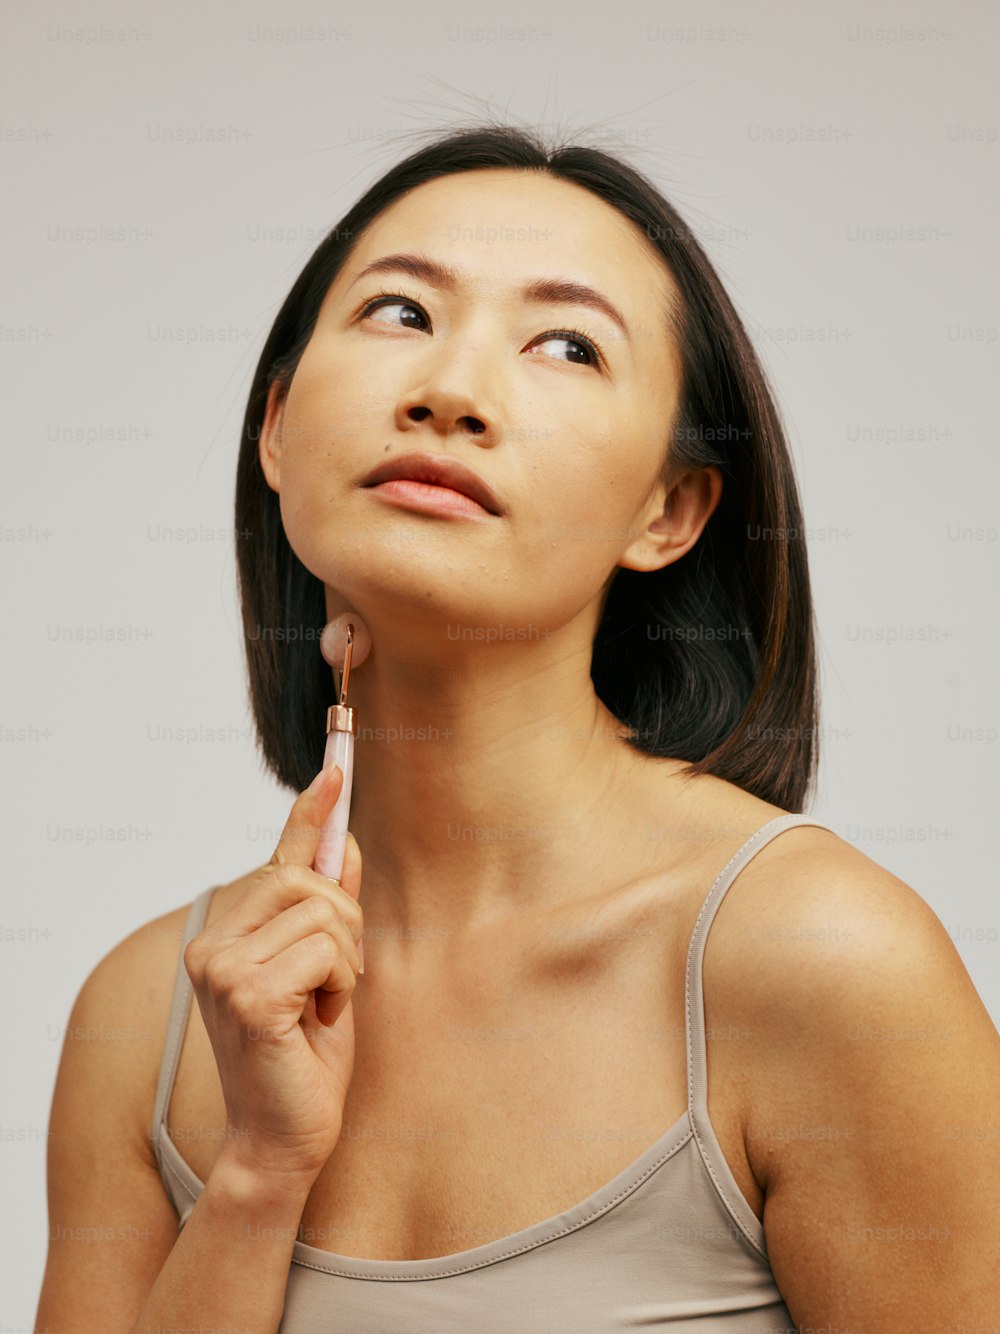 a woman holding a toothbrush up to her face